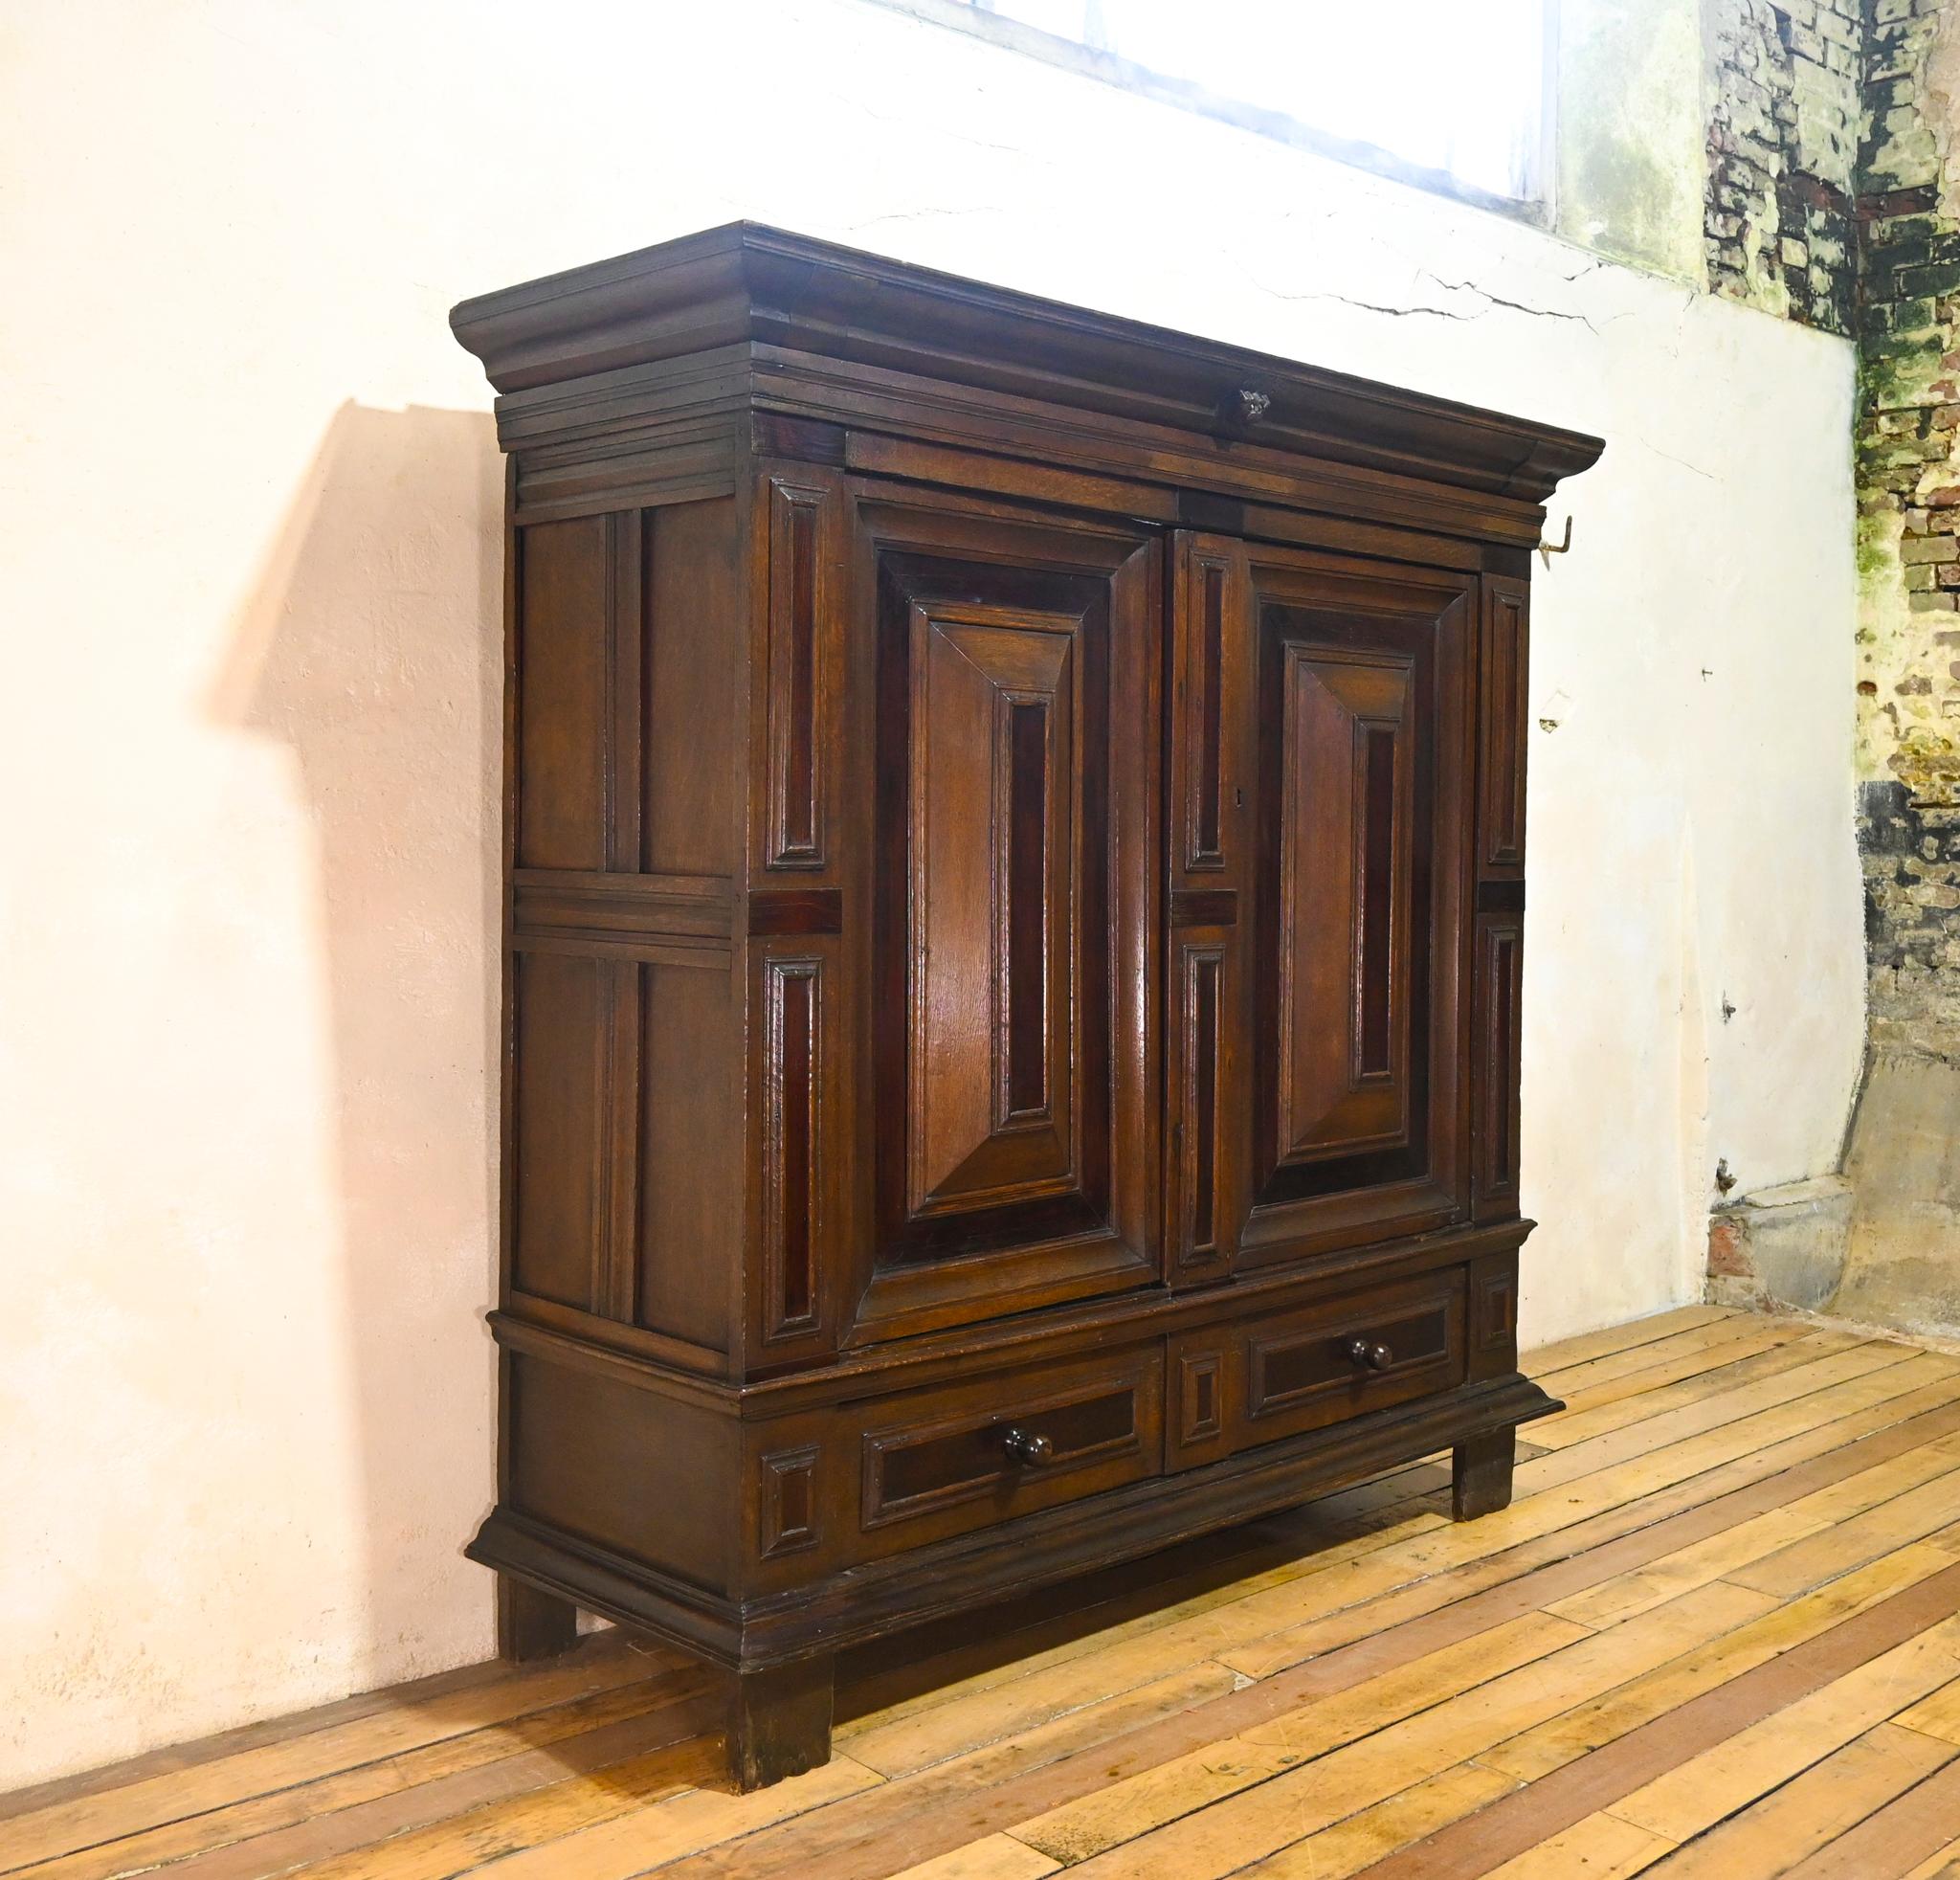 An impressive Dutch oak cupboard formally also as a 'Kast' or 'Kas'. Dating from the late 17th century, this cupboard would have originally been used for storing handmade cloth, bedding, and blankets.

The interior of this cupboard features two